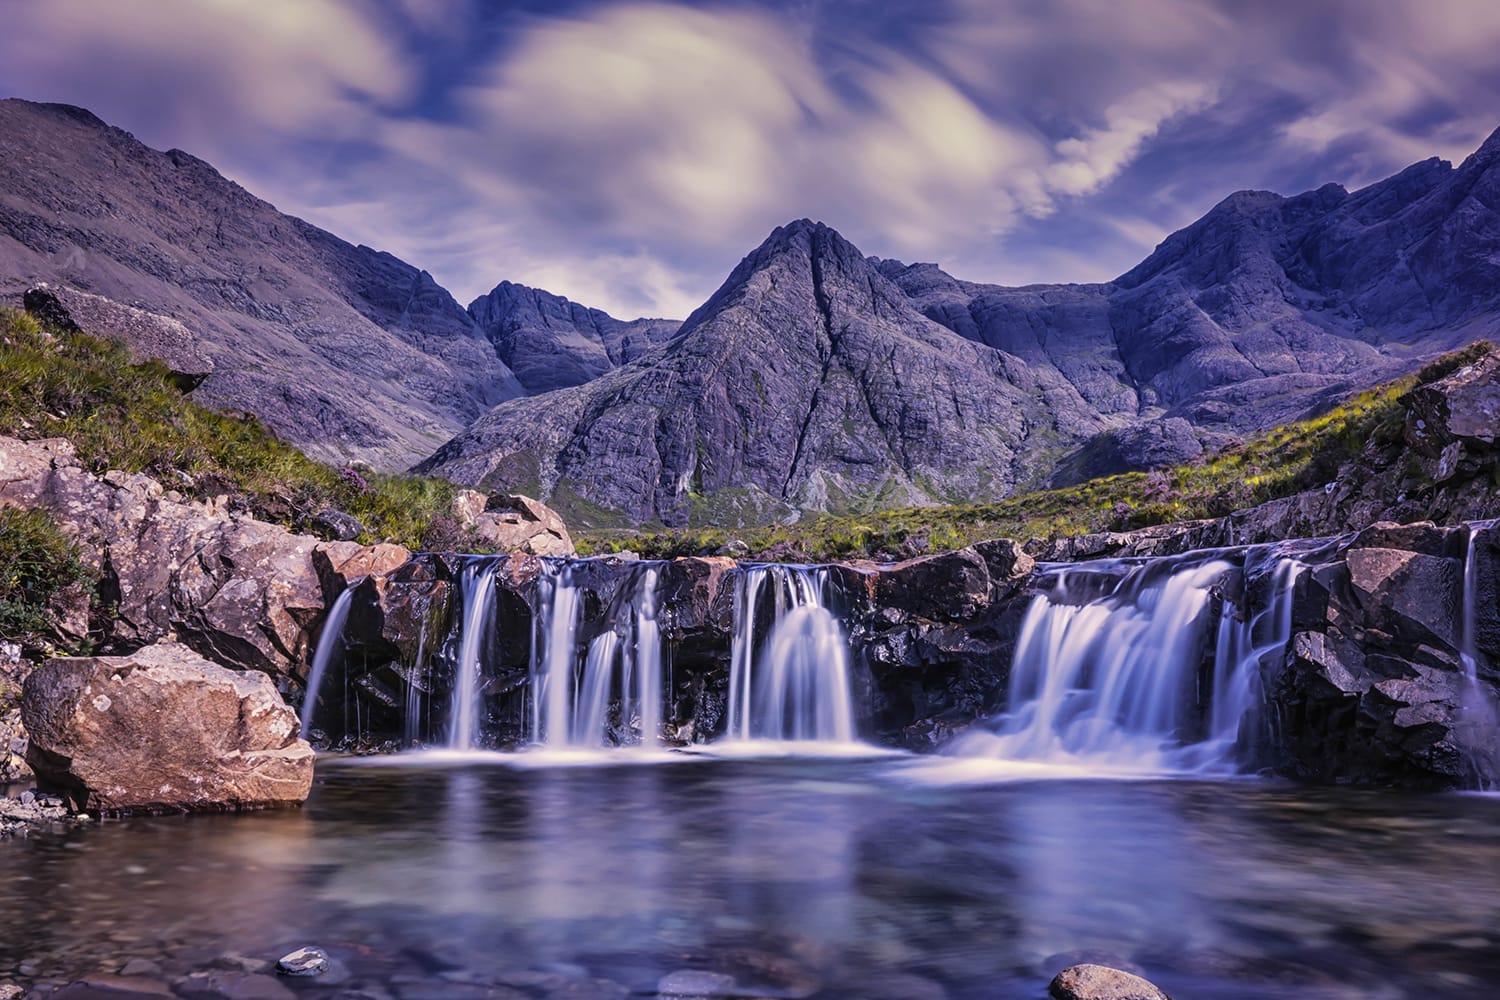 The Complete Guide to Shooting Incredible Waterfall Images